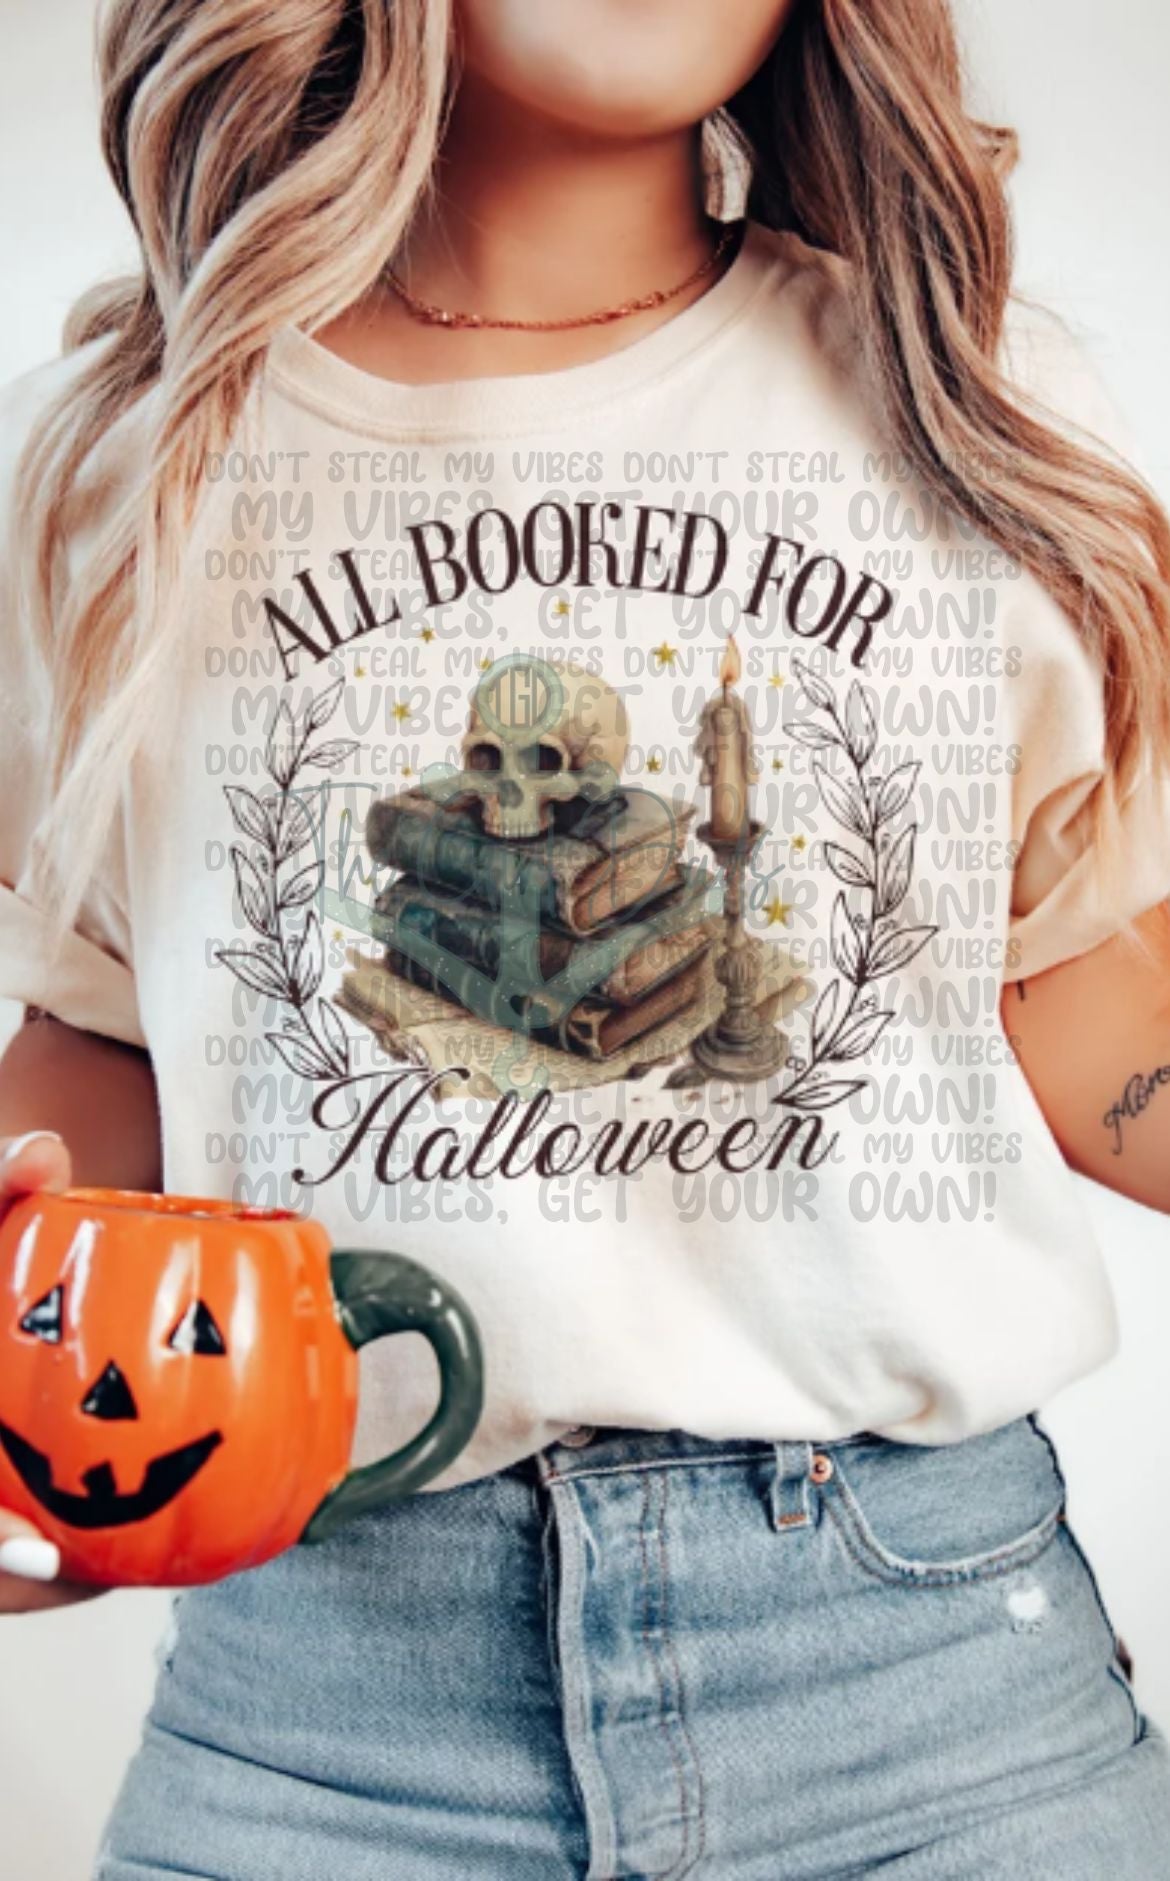 All Booked For Halloween Top Design